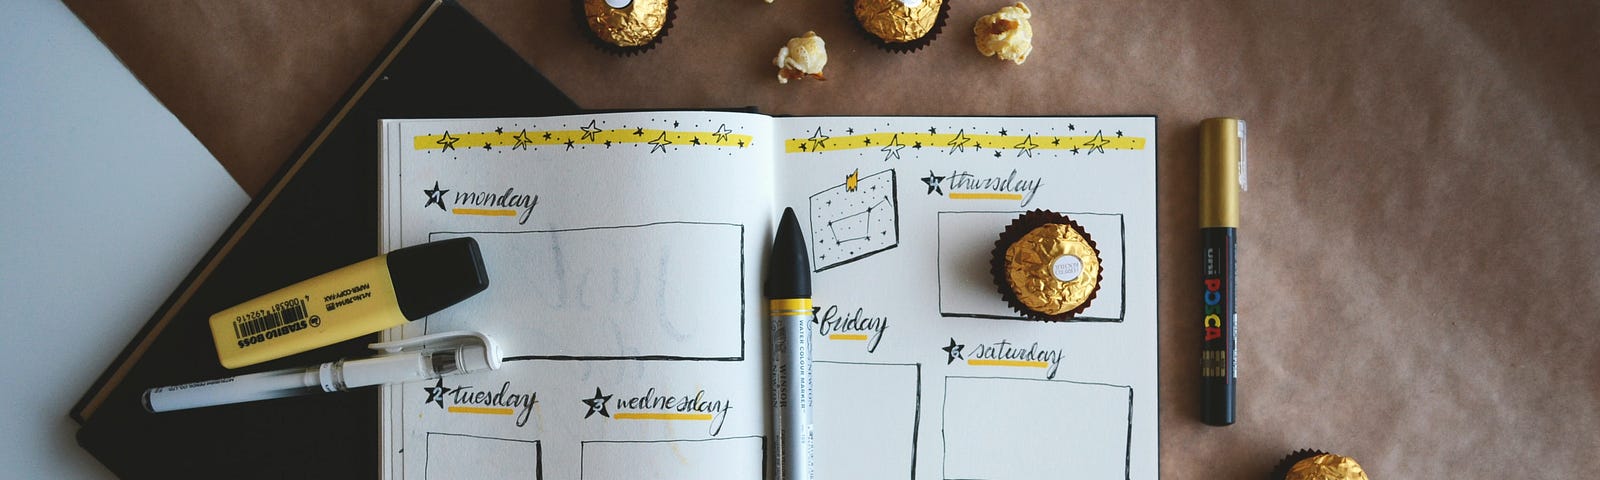 A bullet journal weekly spread lays open. It has a star theme- a star border, constellation drawing, and a star before each day of the week. There is a quote that says, “Look how they shine for you” and everything is underlined in yellow.